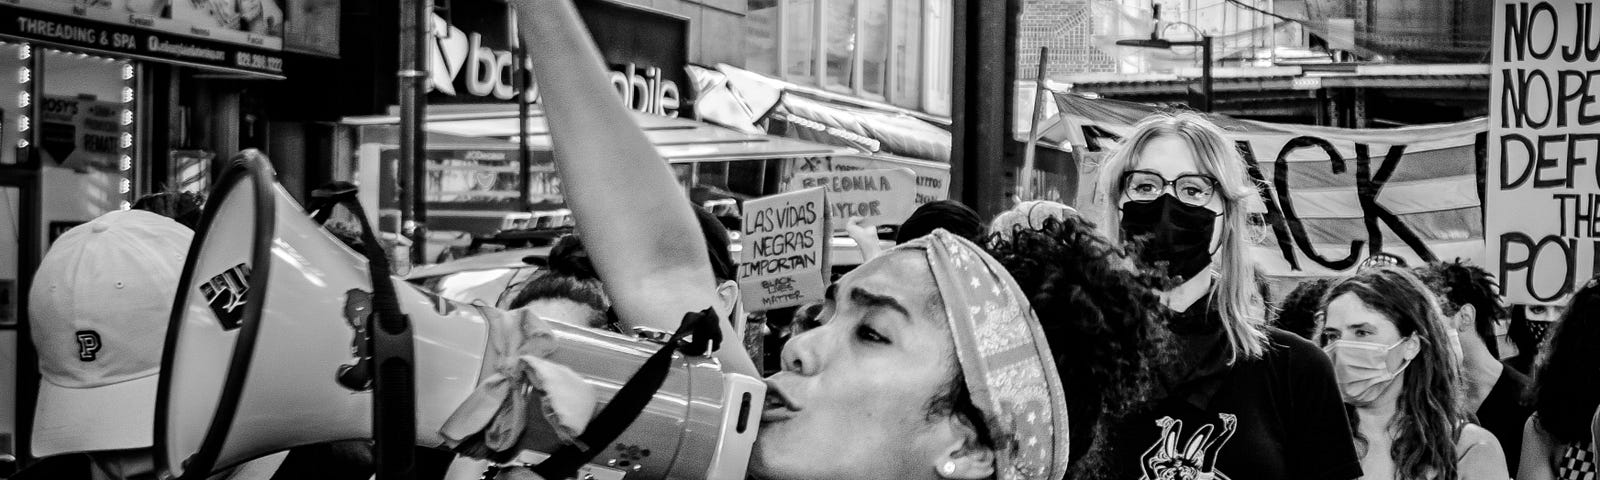 A woman chants into a megaphone at a Defund the Police protest.